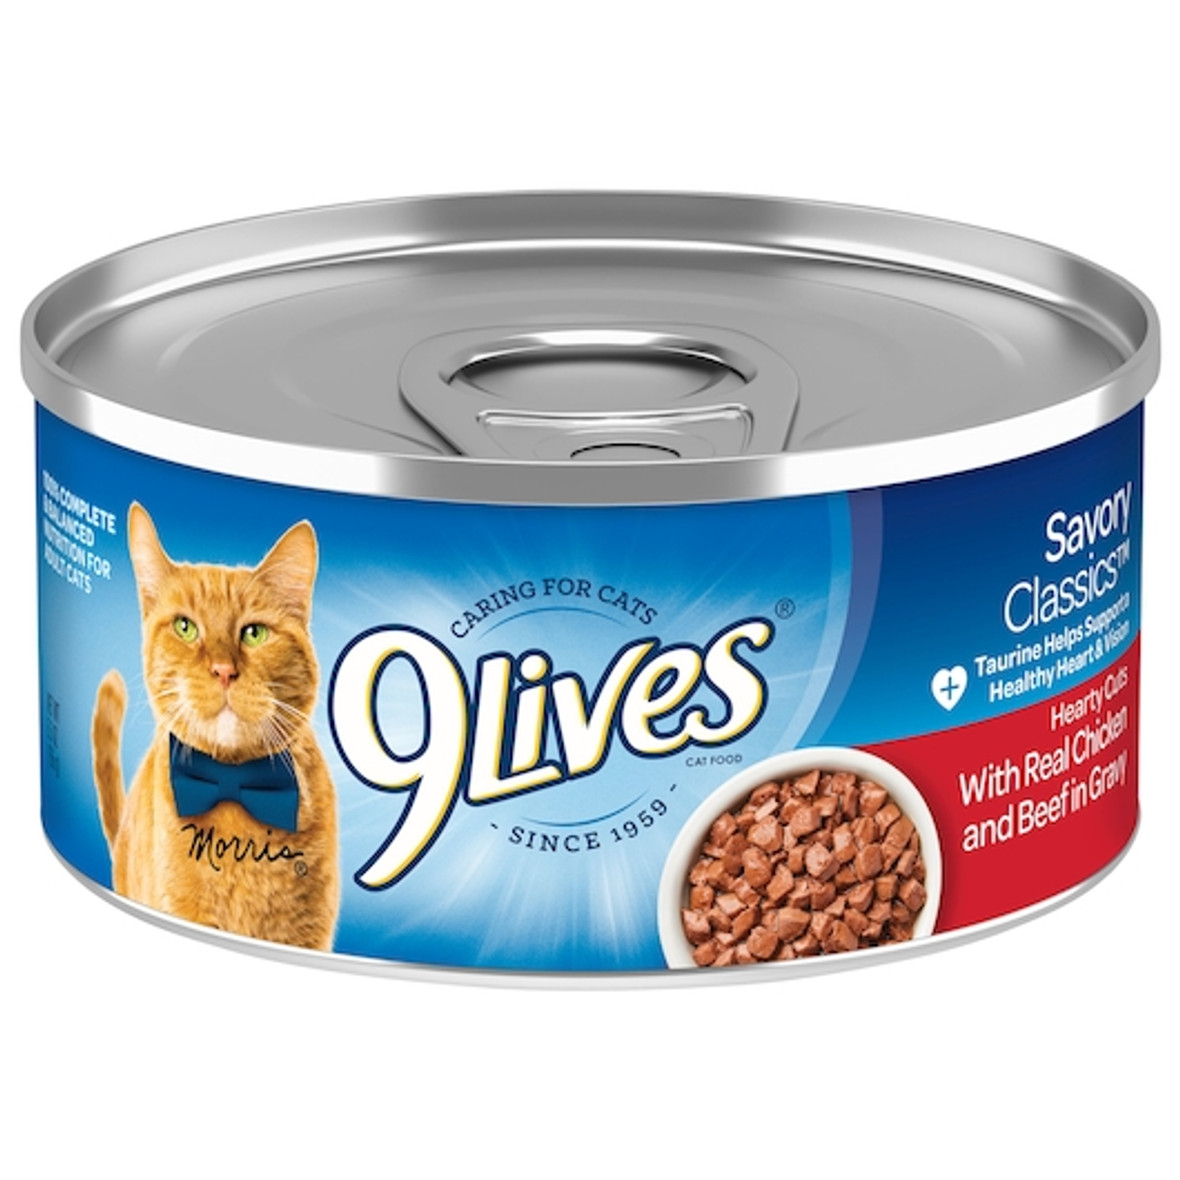 9 Lives Real Beef and Chicken In Gravy Cat Food Singles, 5.5 Ounces, 24 Per Case